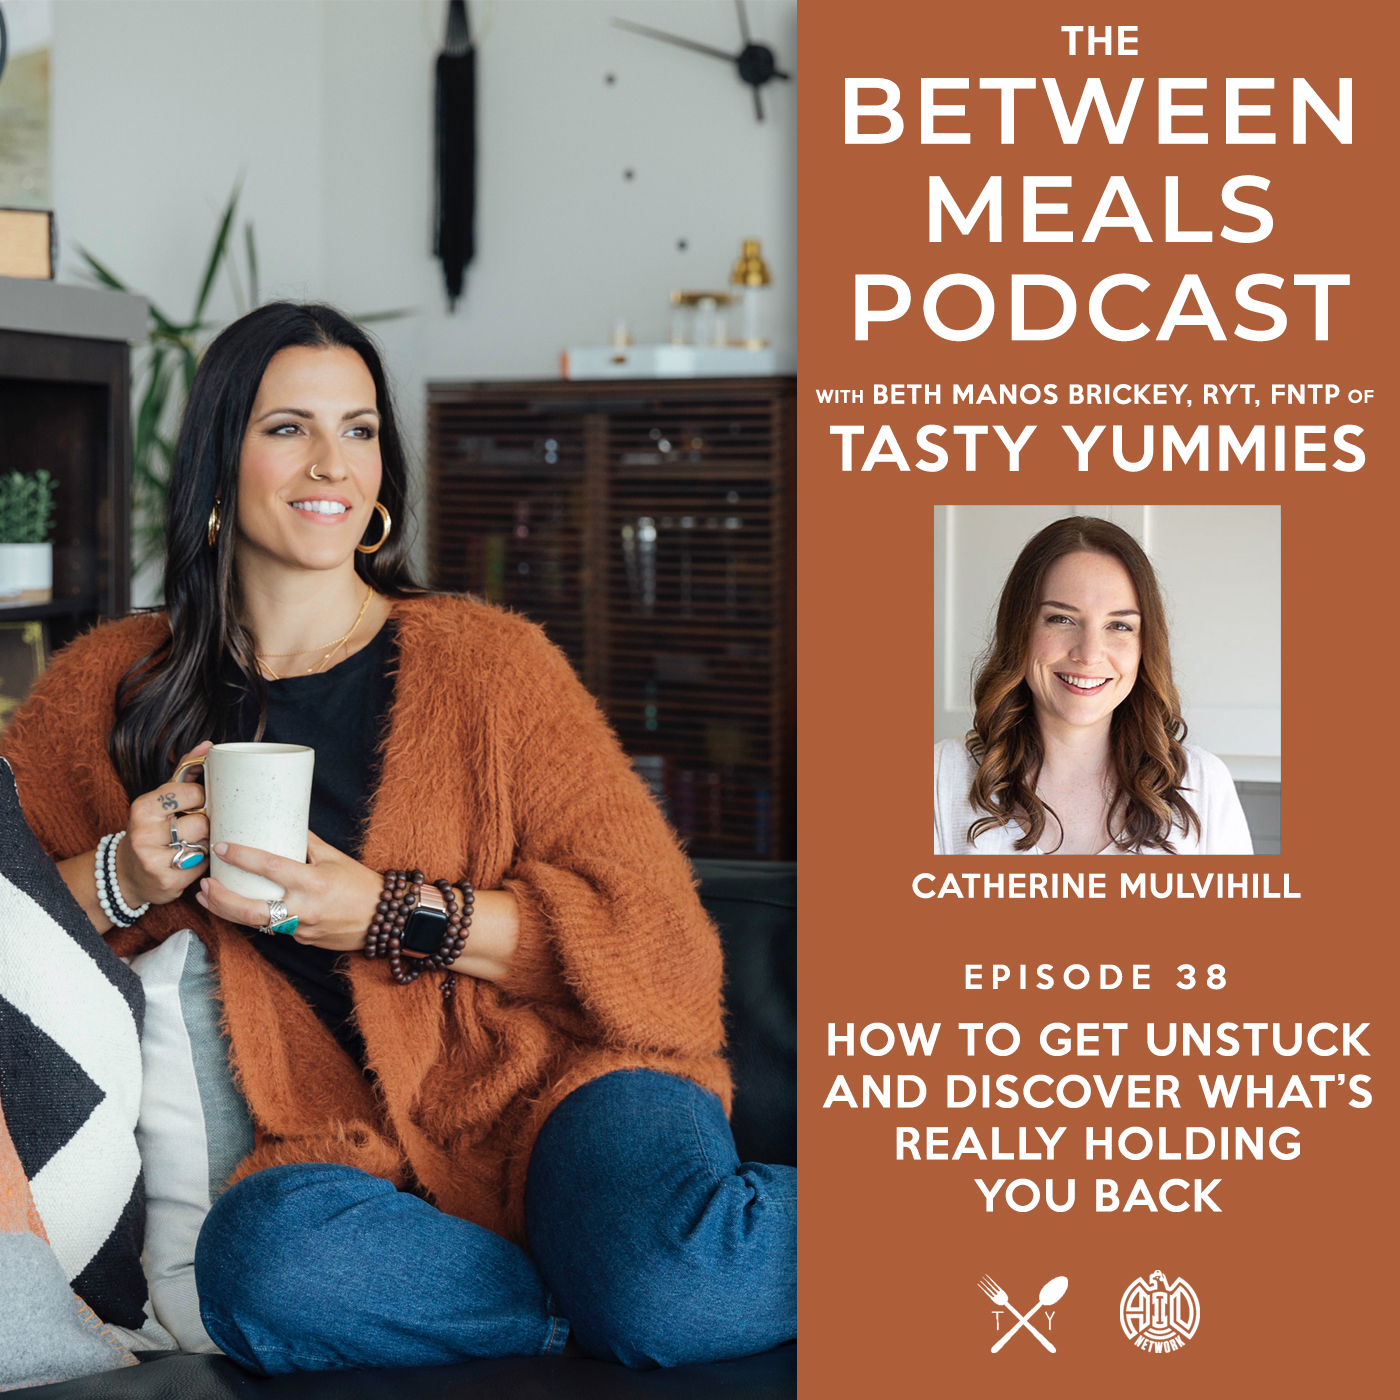 Between Meals Podcast. Episode 38: How to Get Unstuck and Discover What?s Really Holding You Back